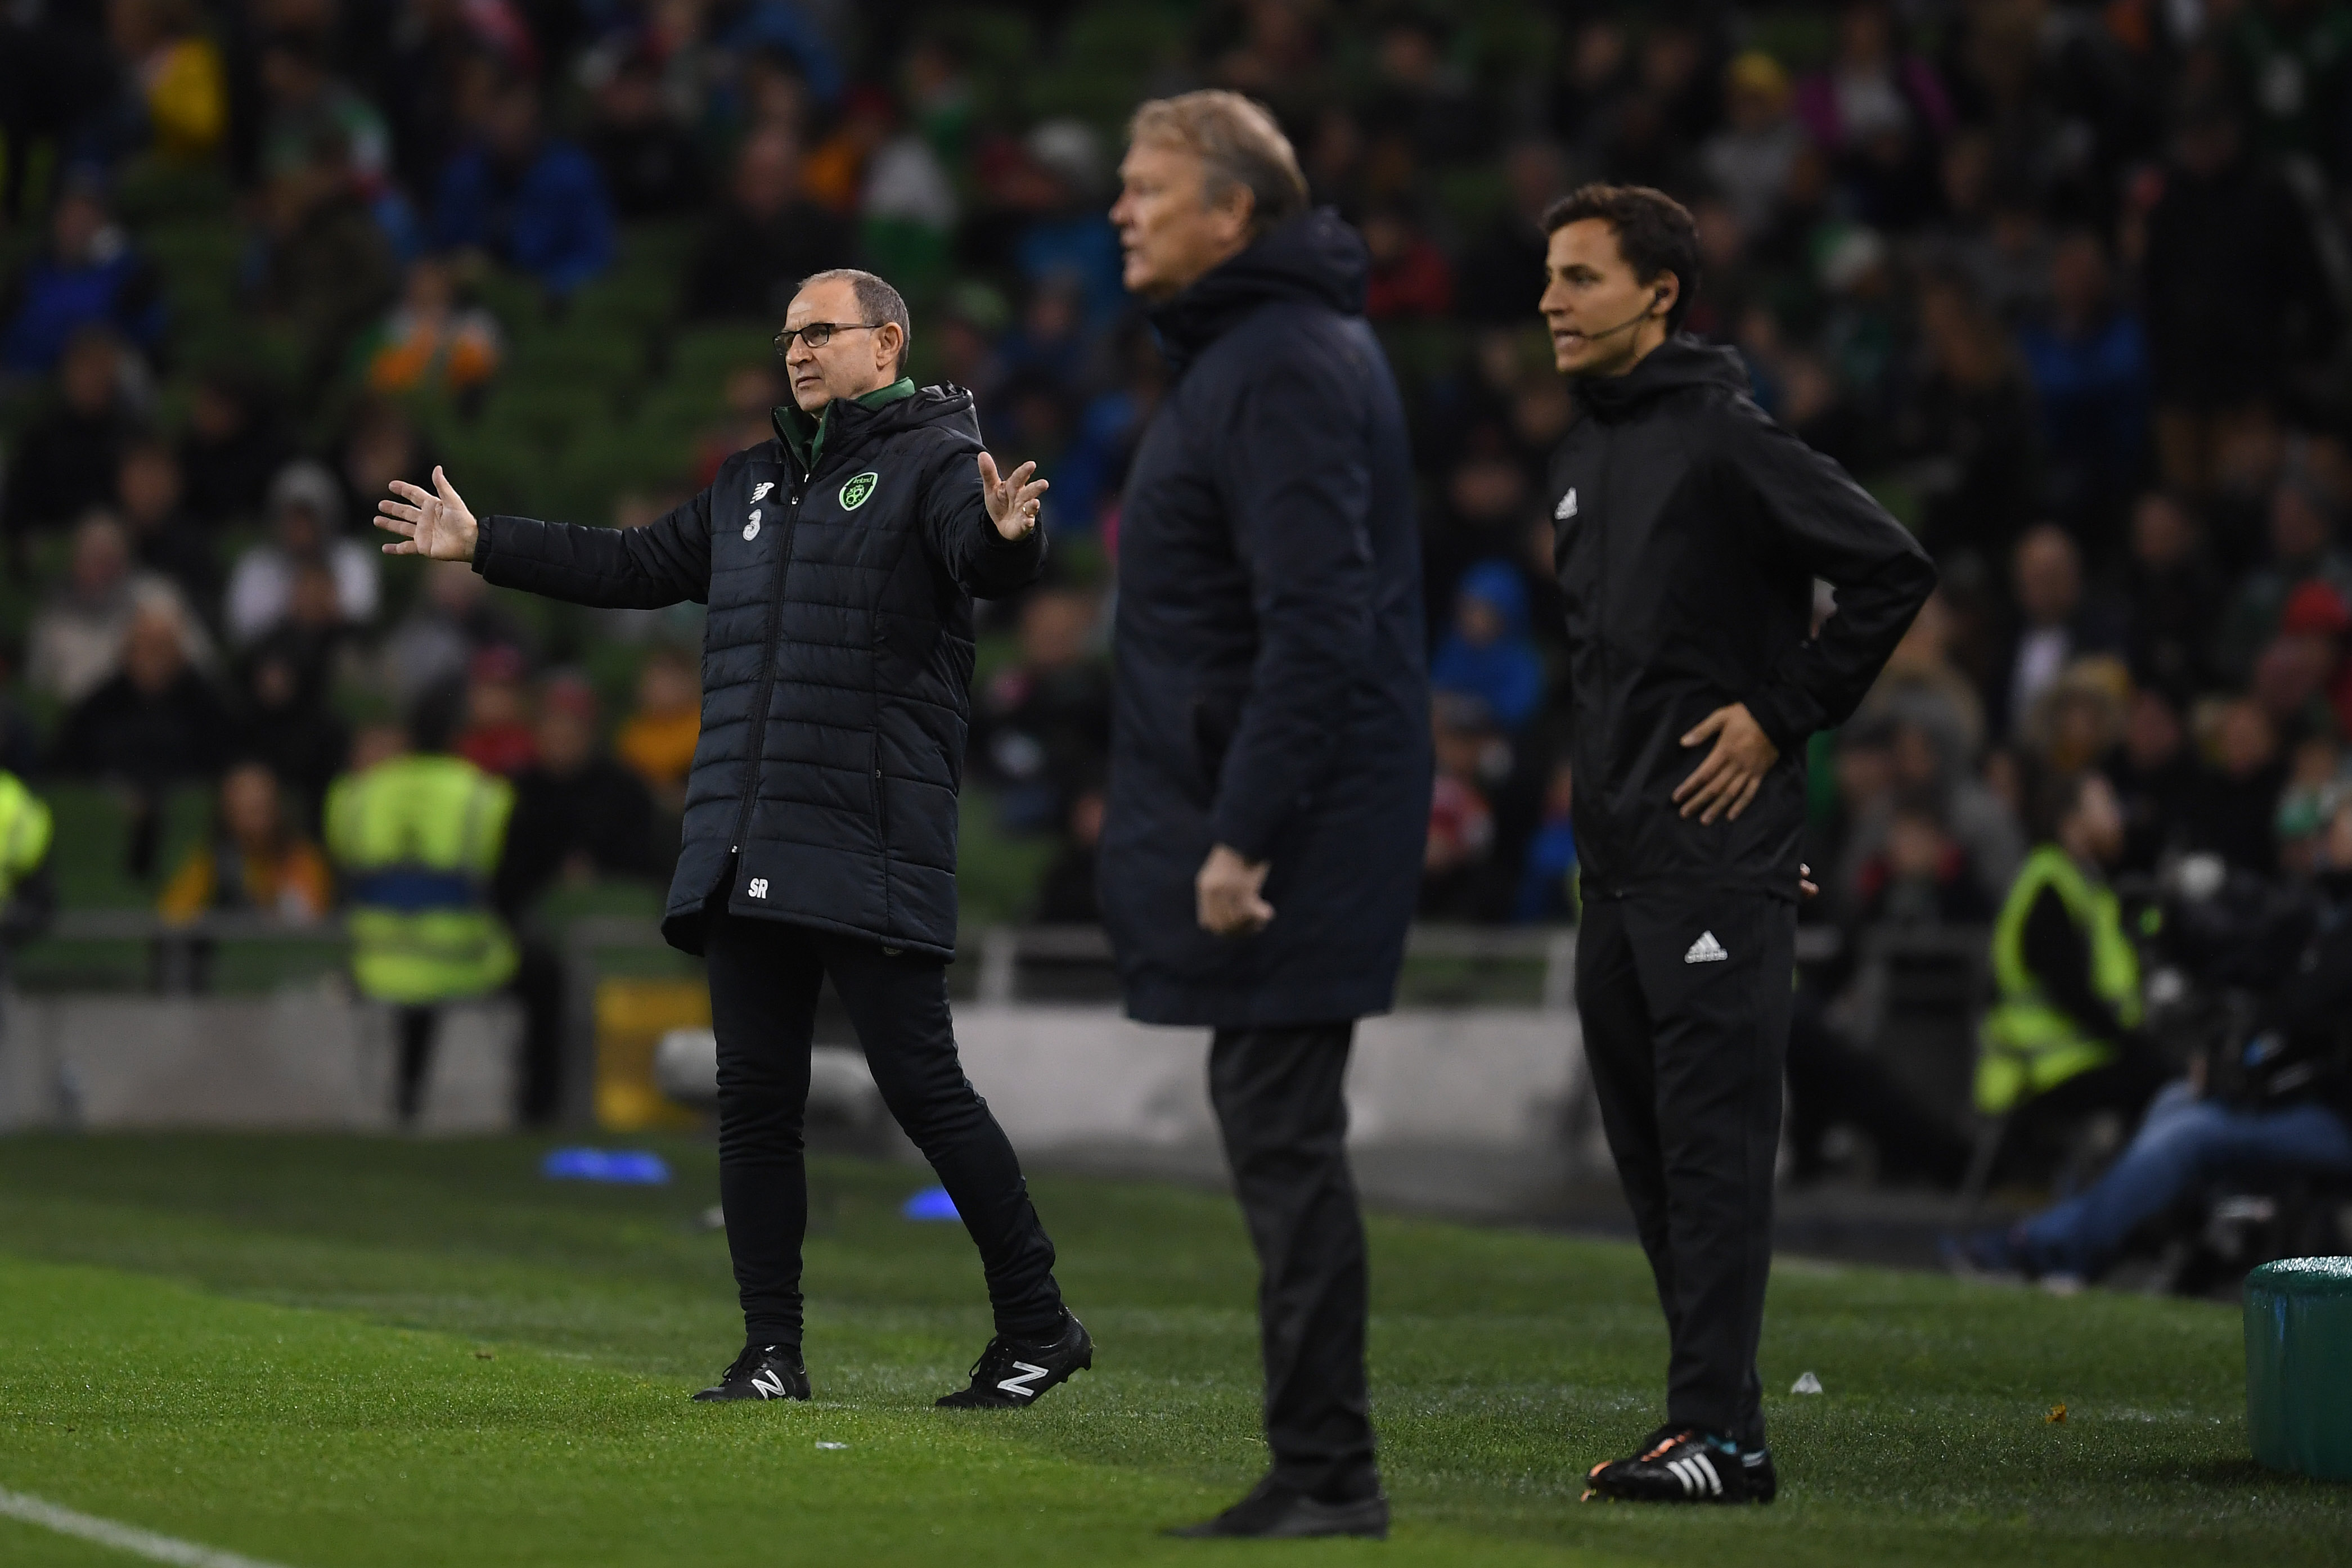 DUBLIN, IRELAND - OCTOBER 13:  Ireland manager Martin O'Neill looks on during the UEFA Nations League B Group Four match between Ireland and Denmark at Aviva Stadium on October 13, 2018 in Dublin, Ireland.  (Photo by Mike Hewitt/Getty Images)